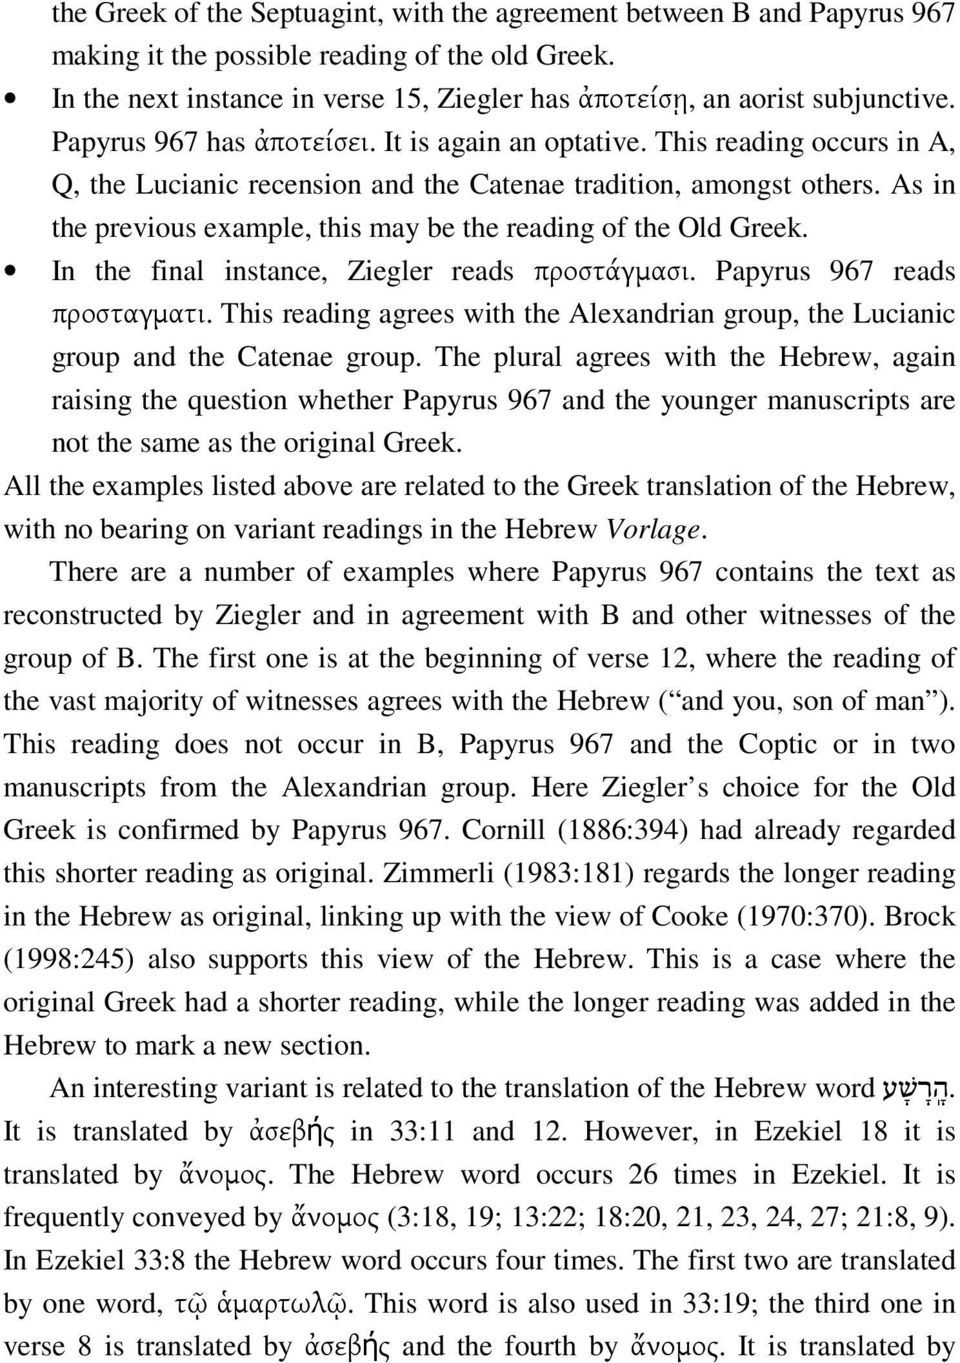 This reading occurs in A, Q, the Lucianic recension and the Catenae tradition, amongst others. As in the previous example, this may be the reading of the Old Greek.